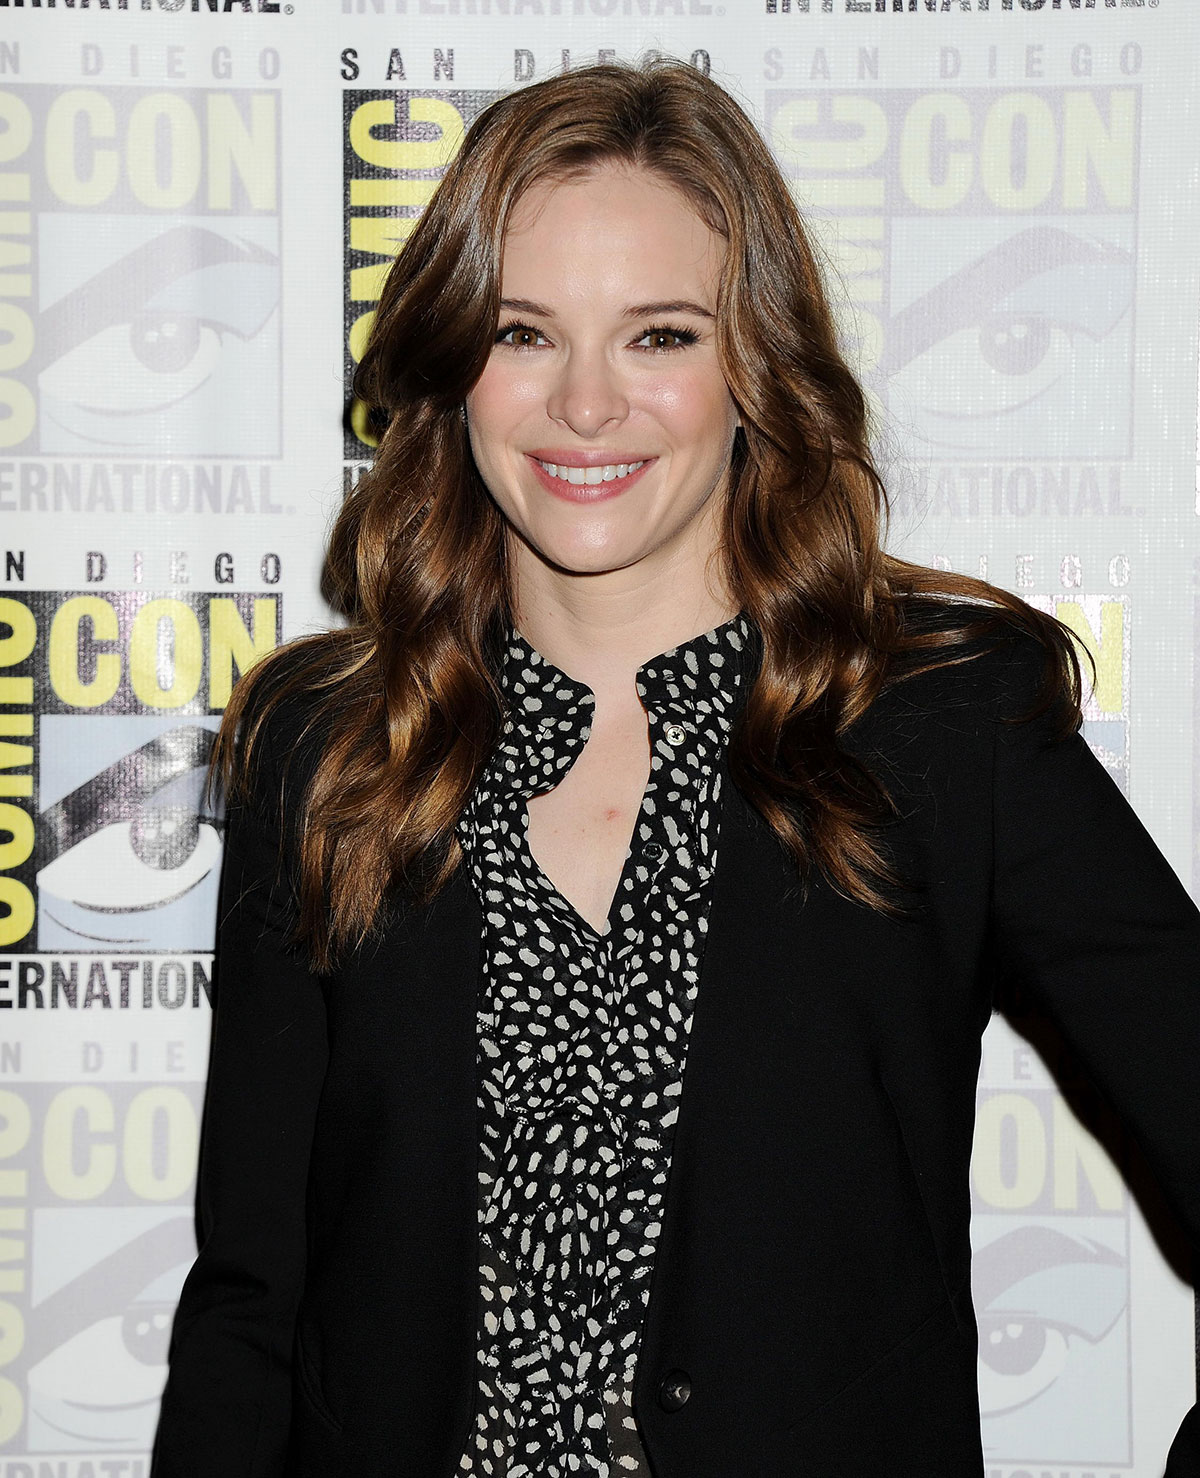 Danielle Panabaker attends The Flash press line during Comic-Con